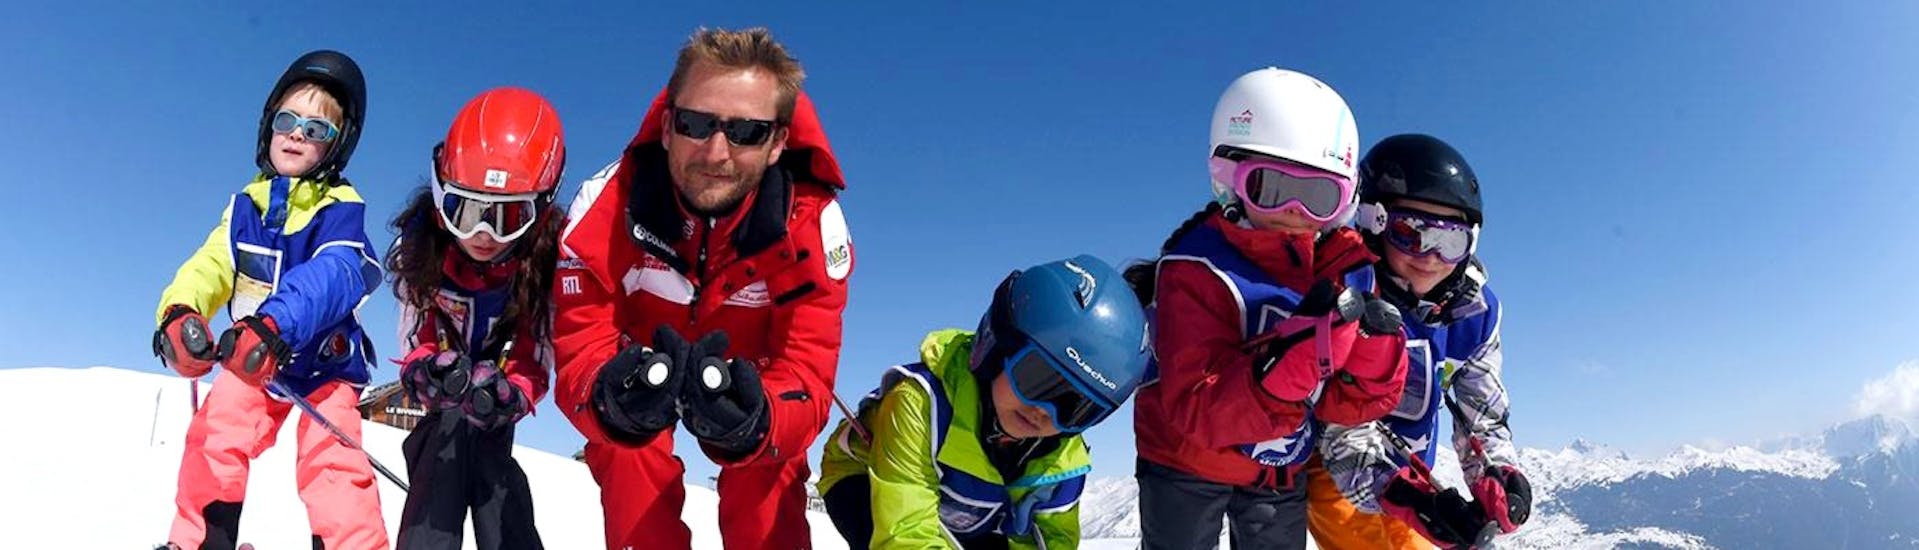 Children having fun on the slopes with their instructor during kids ski lessons for advanced skiers with the Ski School ESF Serre Chevalier - Villeneuve.